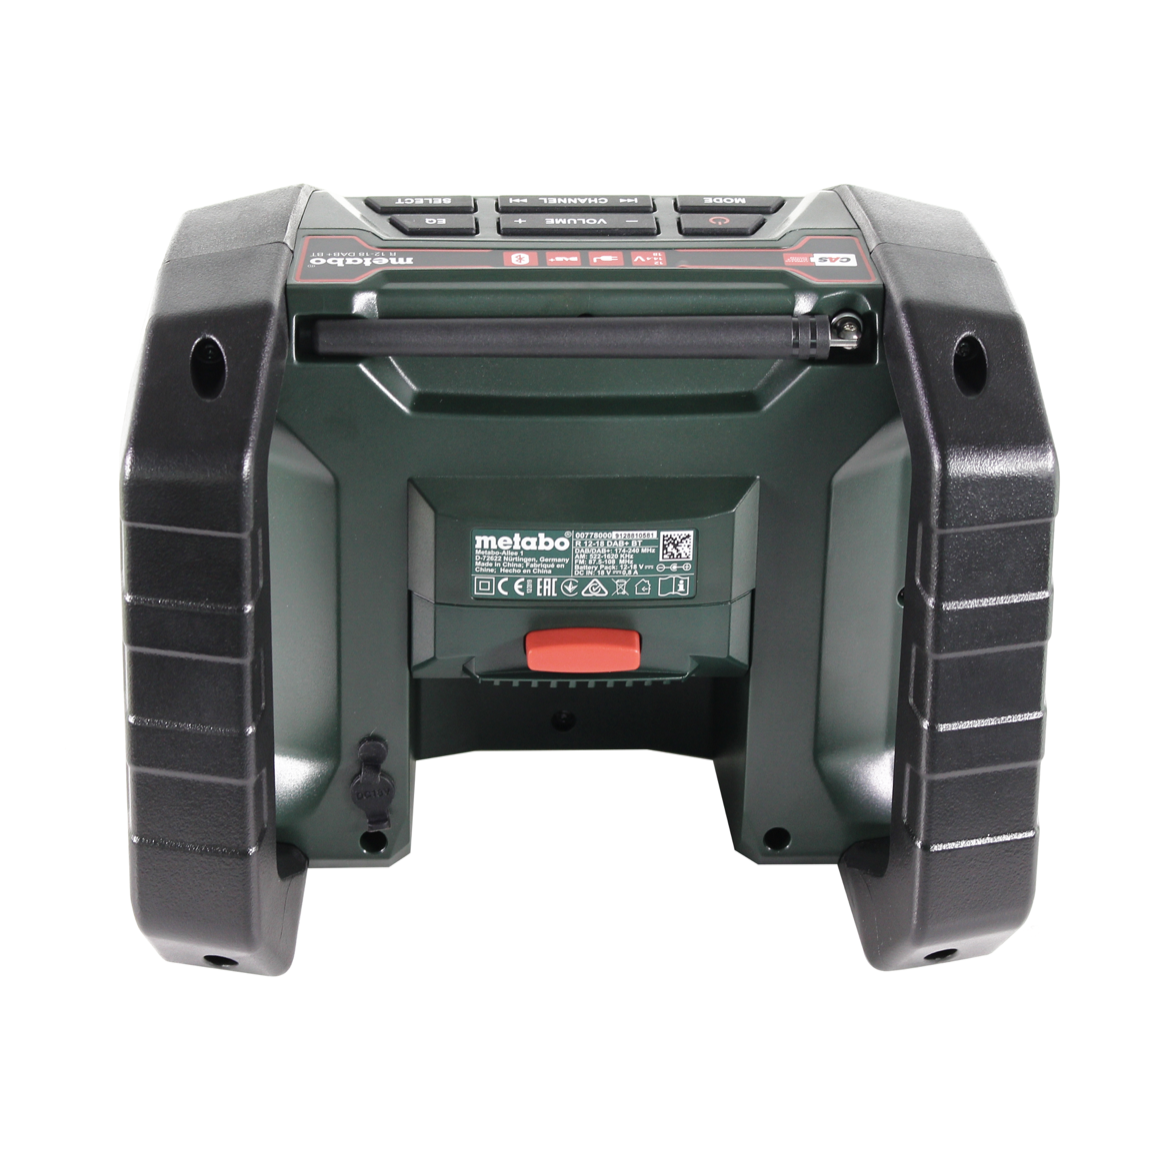 Radio chargeur r 12-18 dab bt pick+mix metabo (sans batterie ni chargeur) - 600778850 3